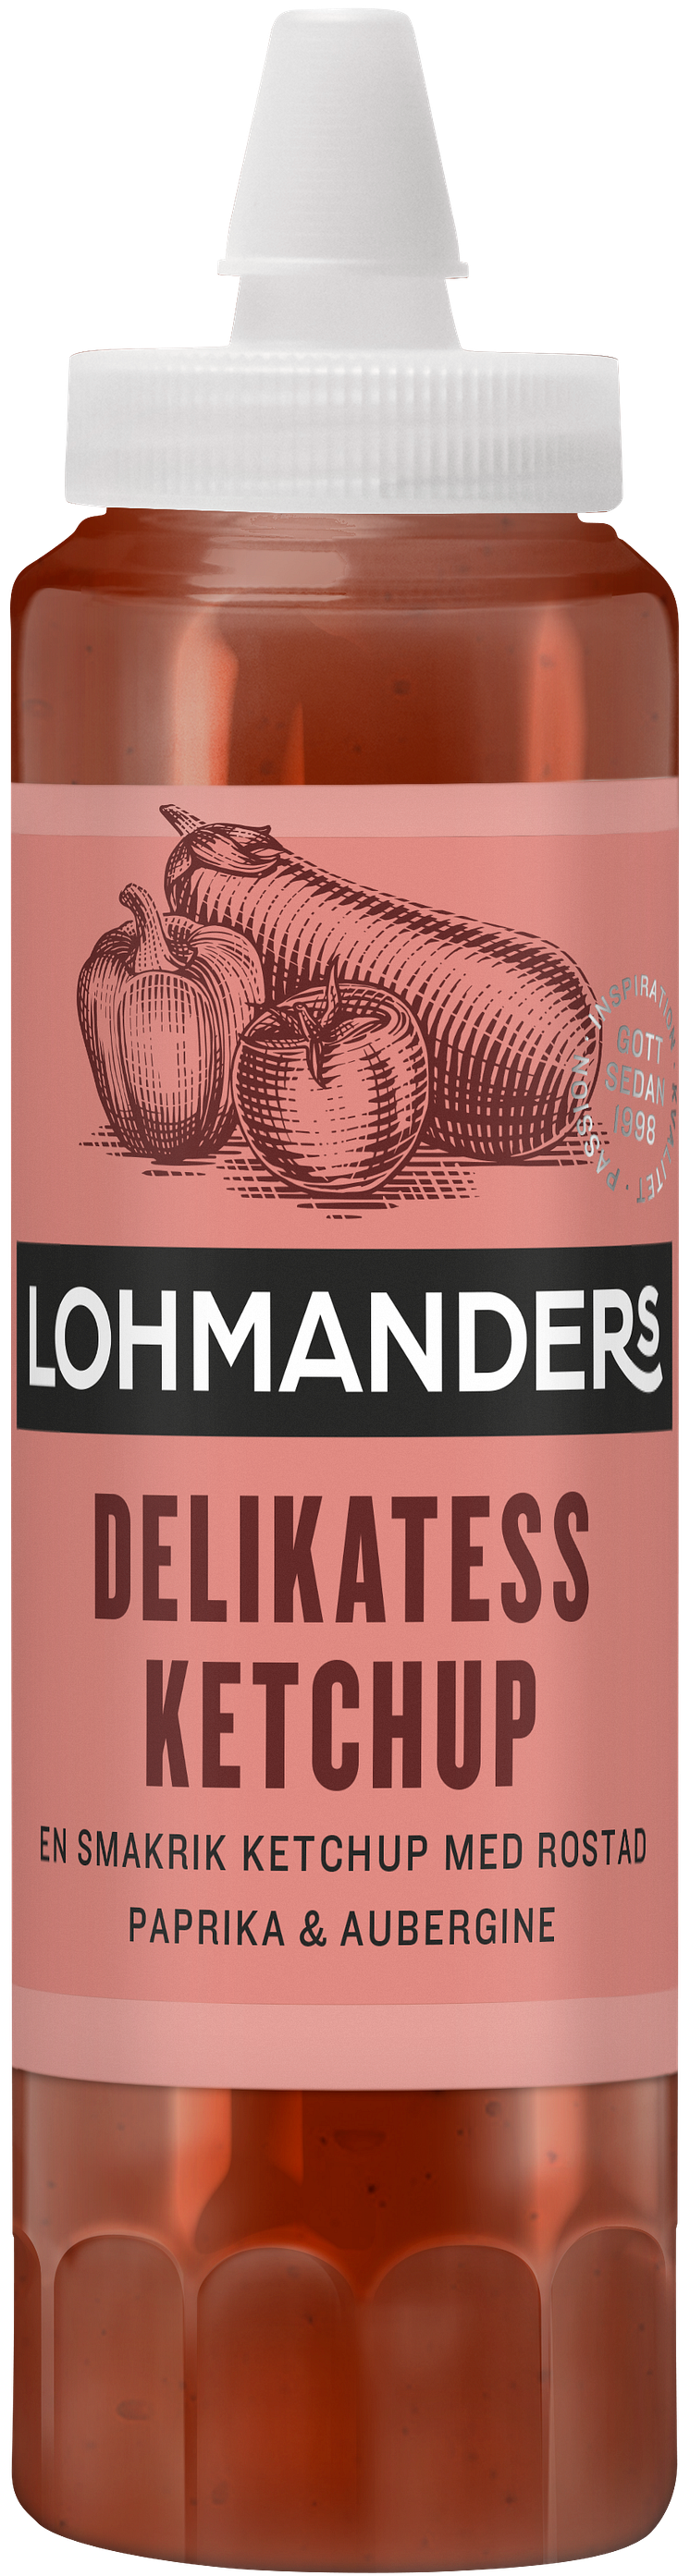 149878 621022 Lohmanders Delikatessketchup 250ml FRONT R3